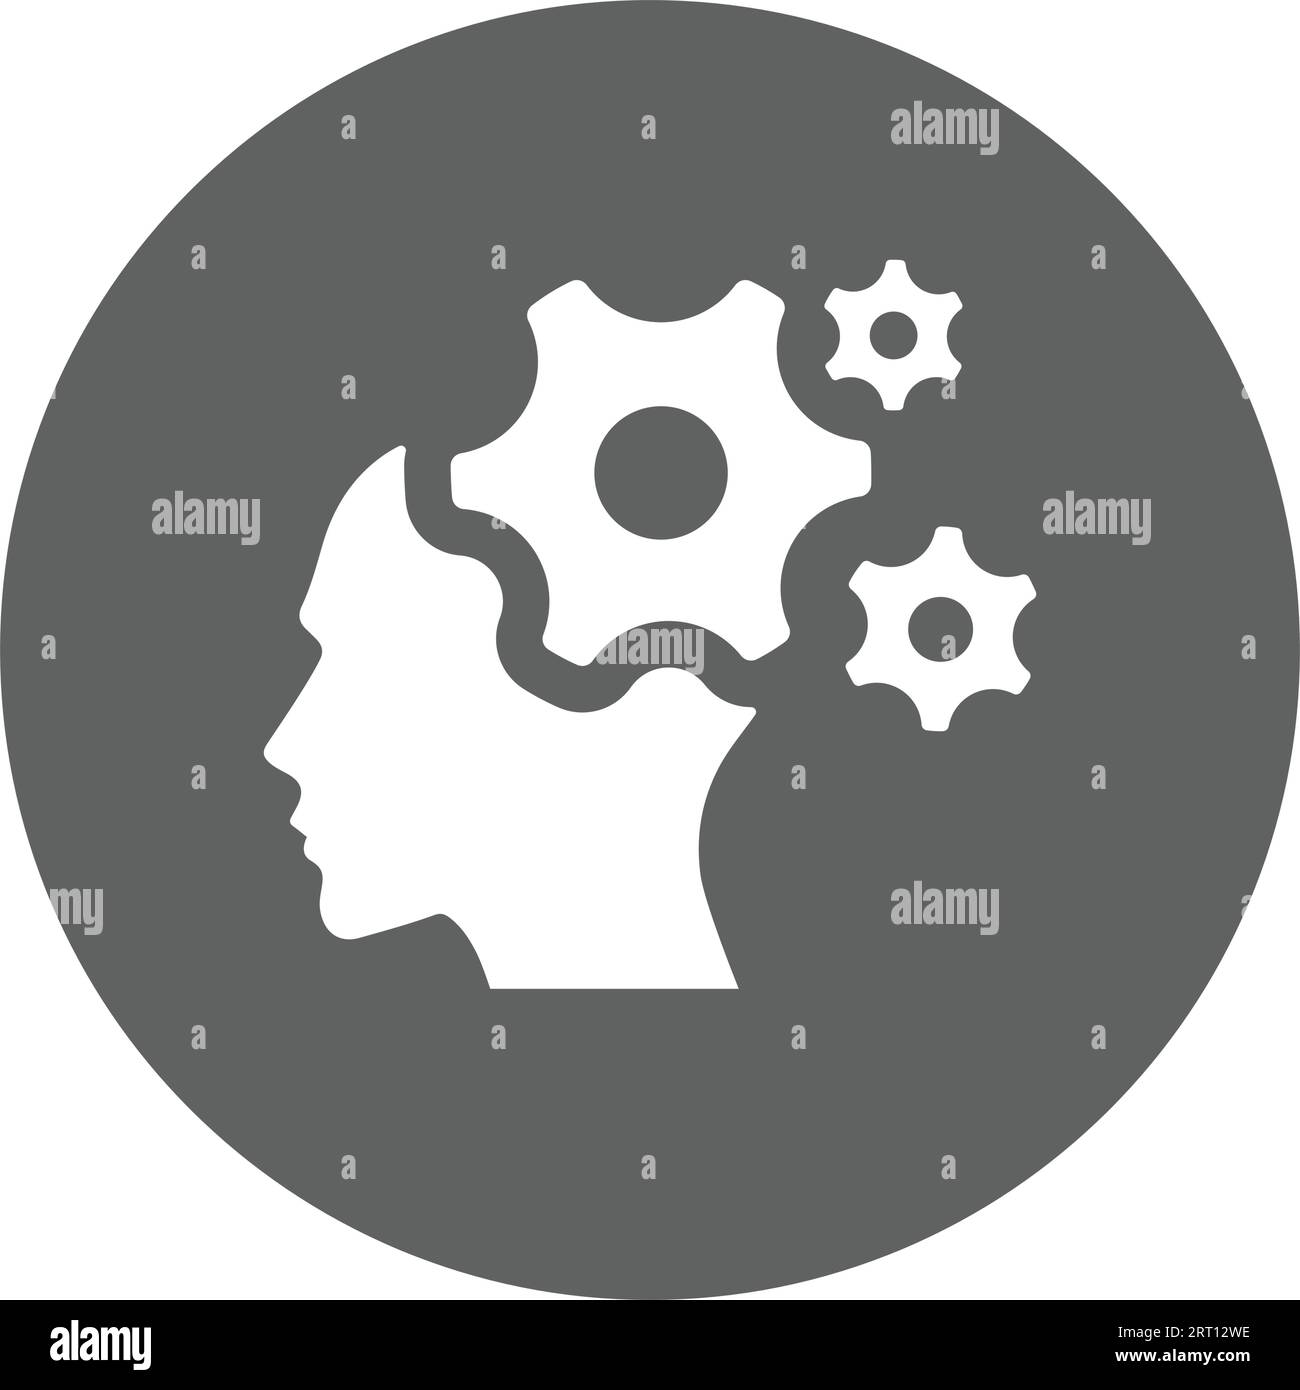 Mind System icon. Use for designing and developing websites, commercial purposes, print media, web or any type of design task. Stock Vector